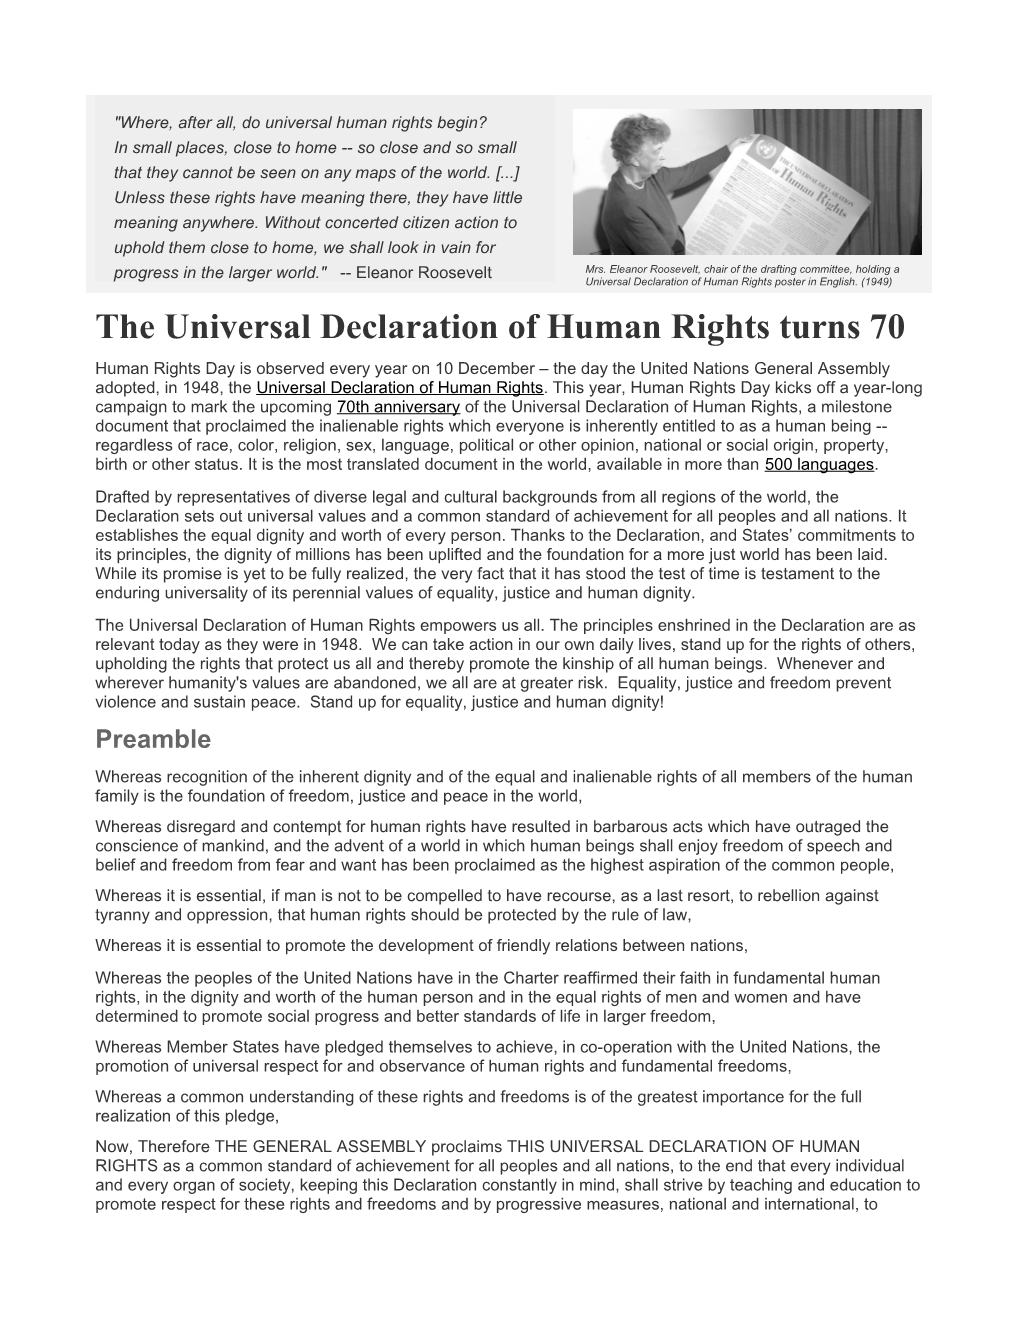 The Universal Declaration of Human Rights Turns 70